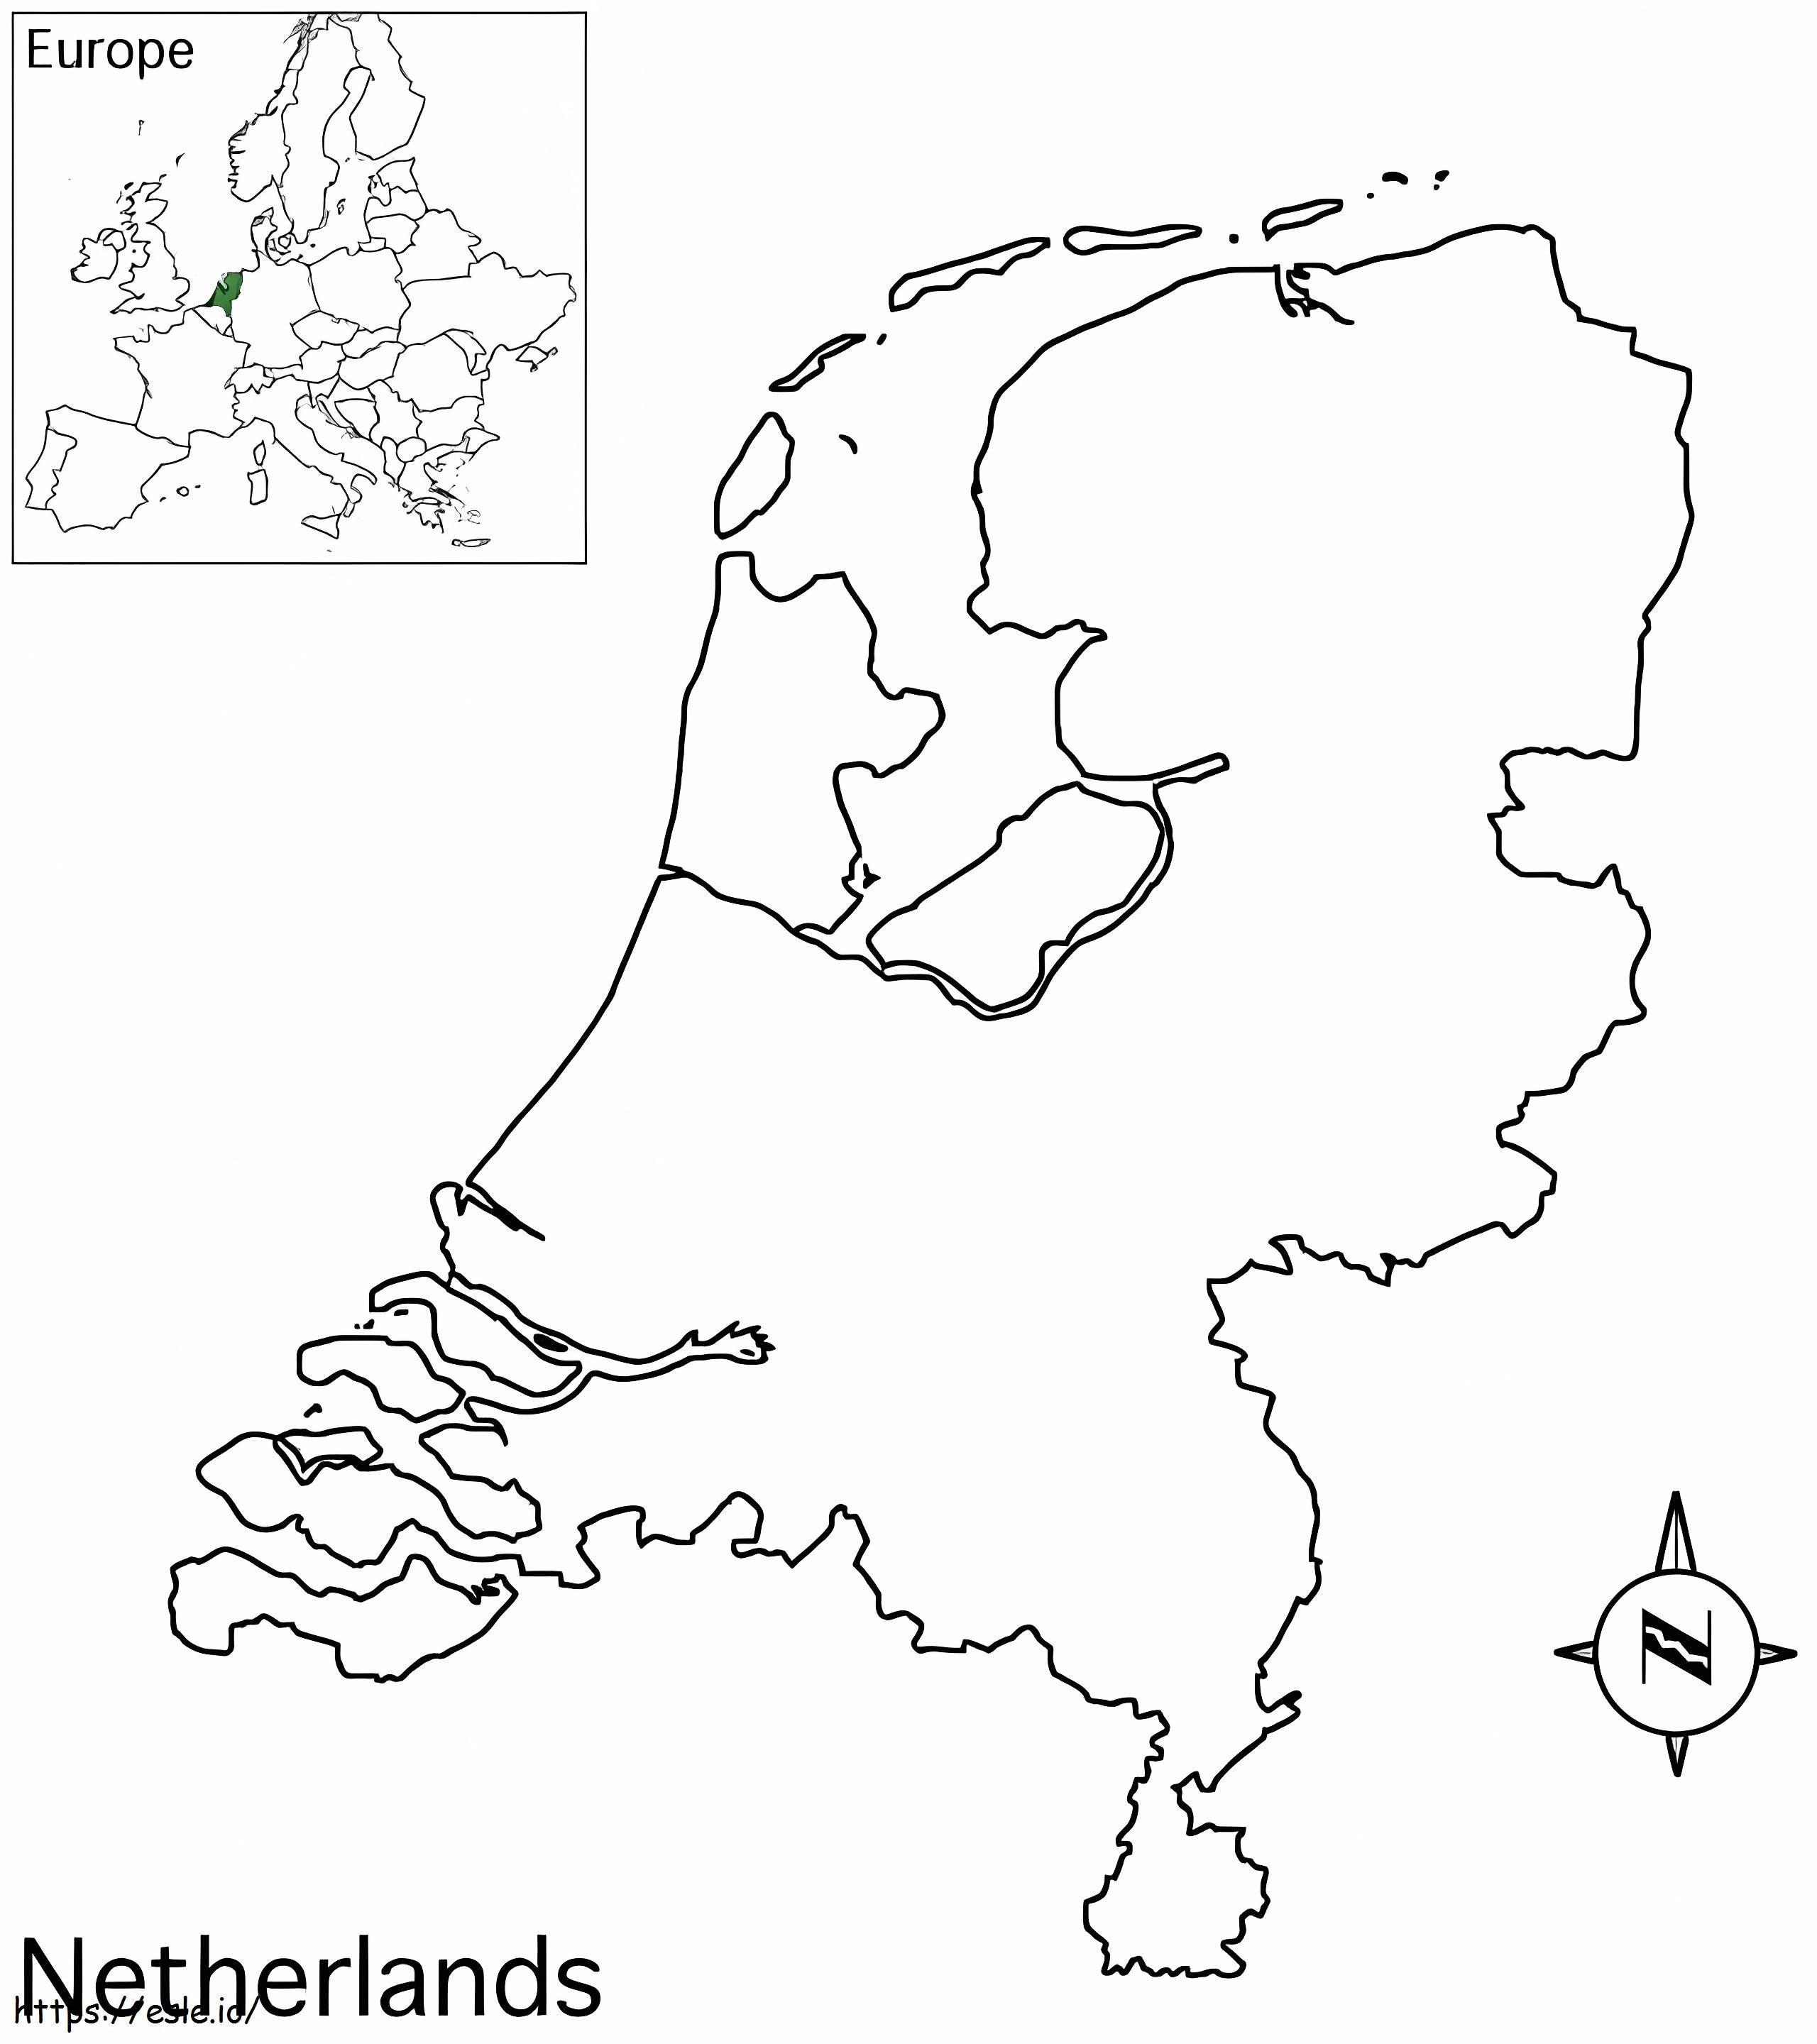 The Netherlands Map 1 coloring page